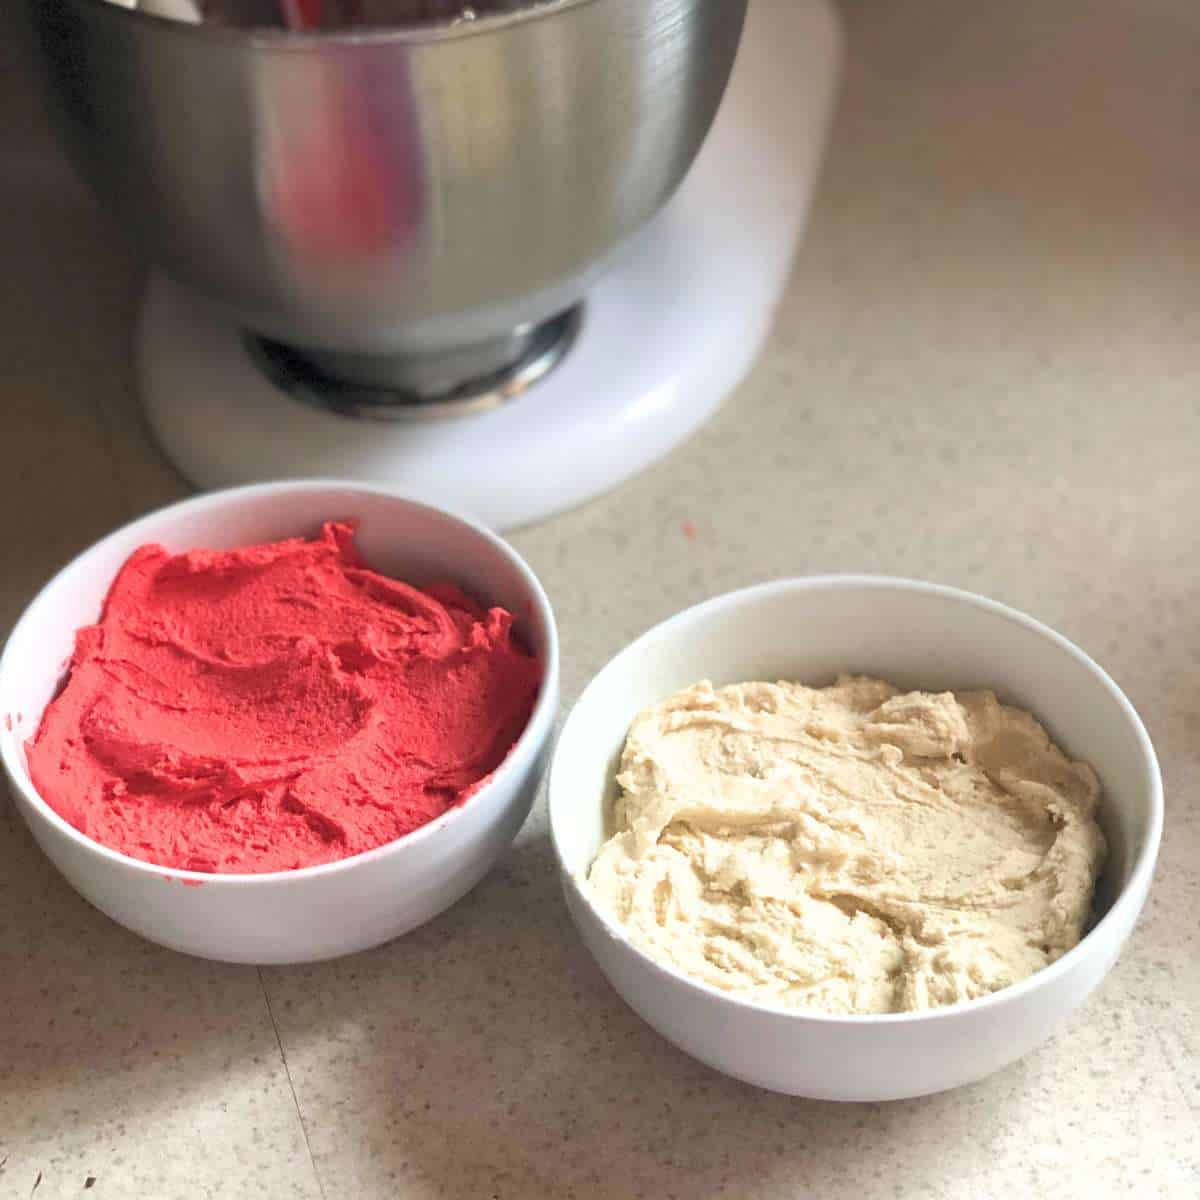 Red and white cookie dough in separate bowls.